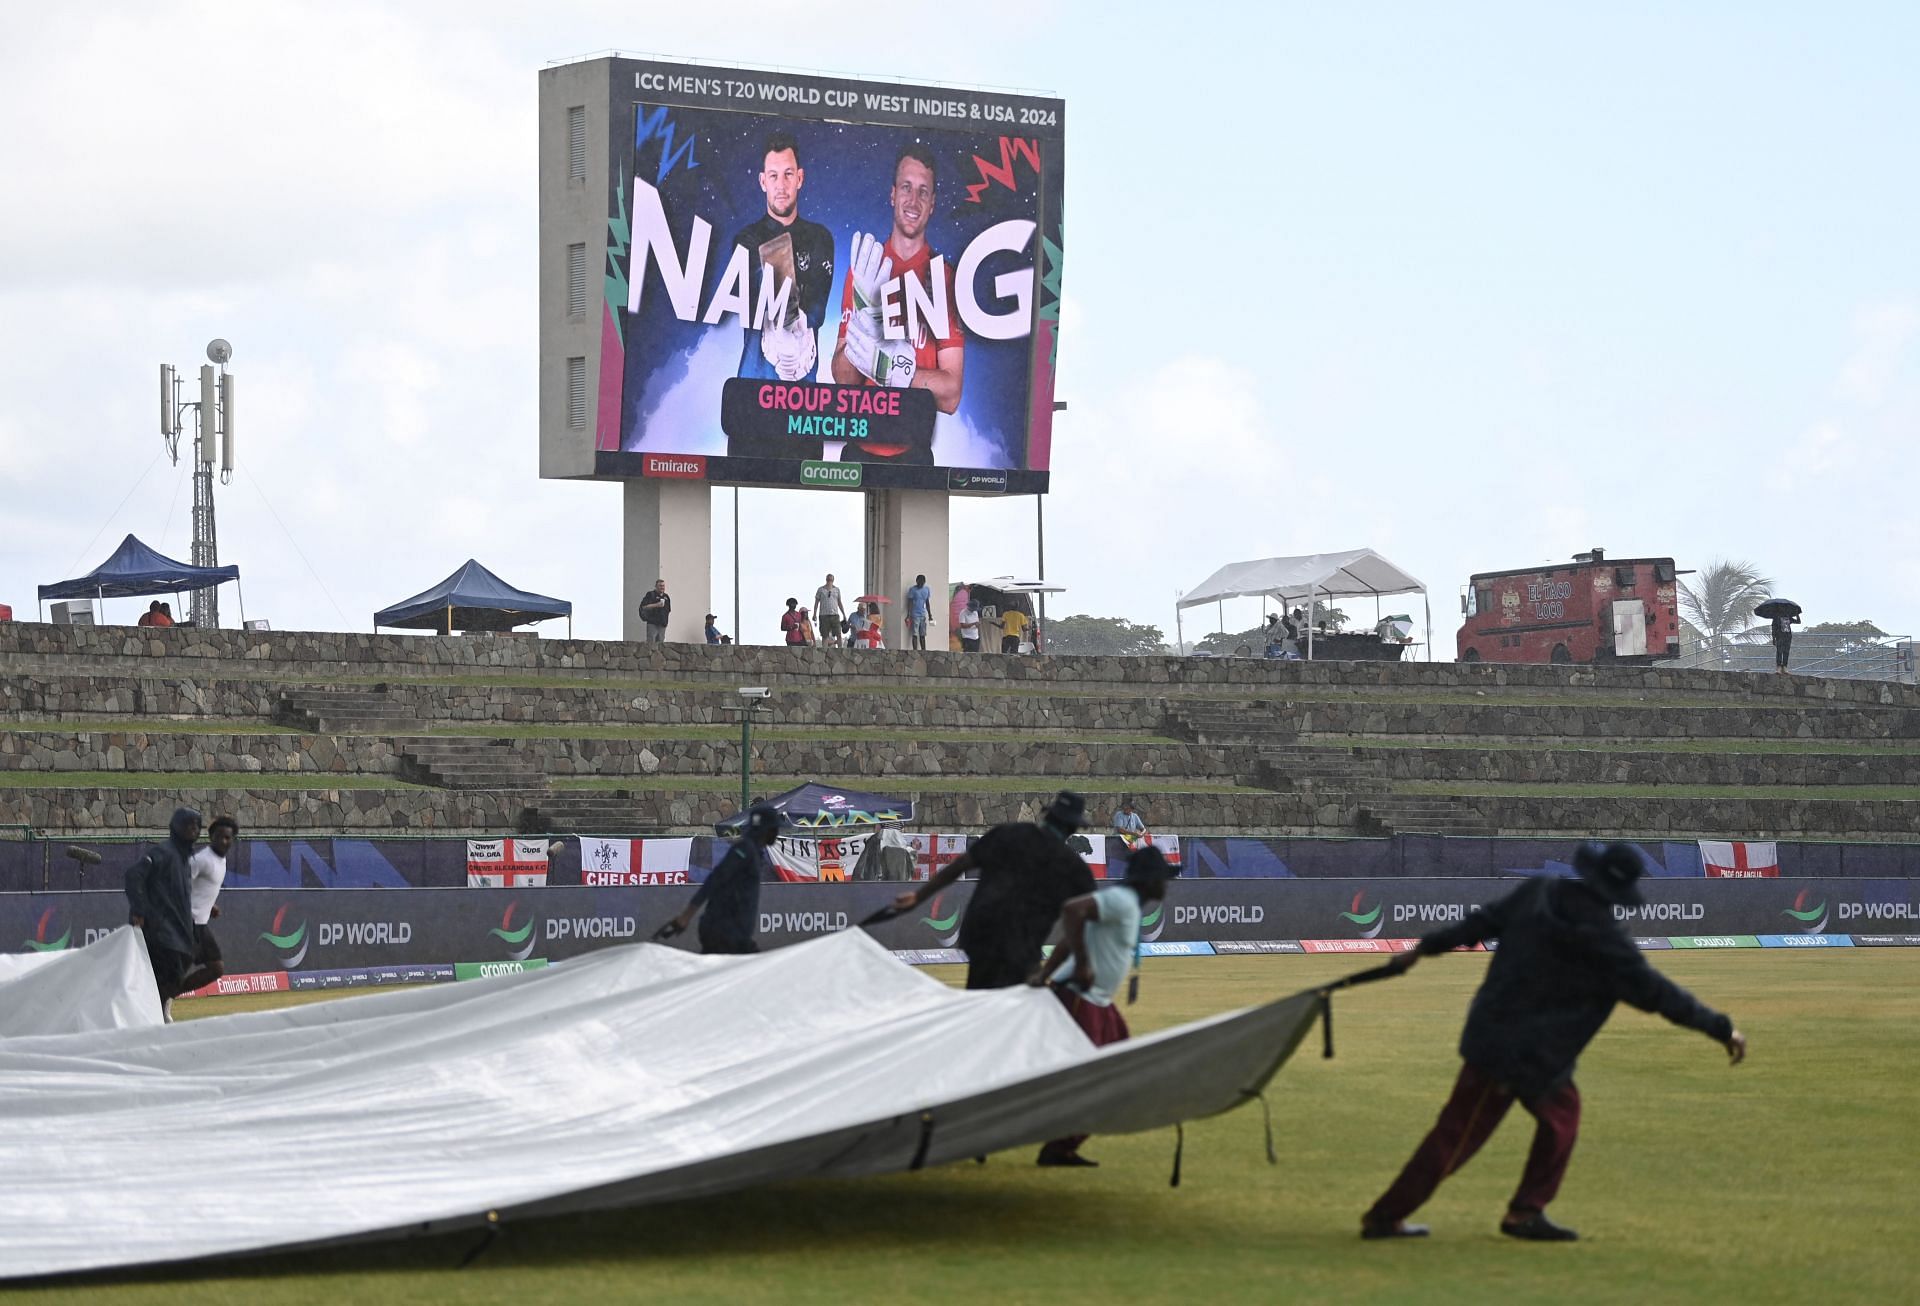 Can England qualify for Super 8 of 2024 T20 World Cup if their match against Namibia is washed out due to rain?